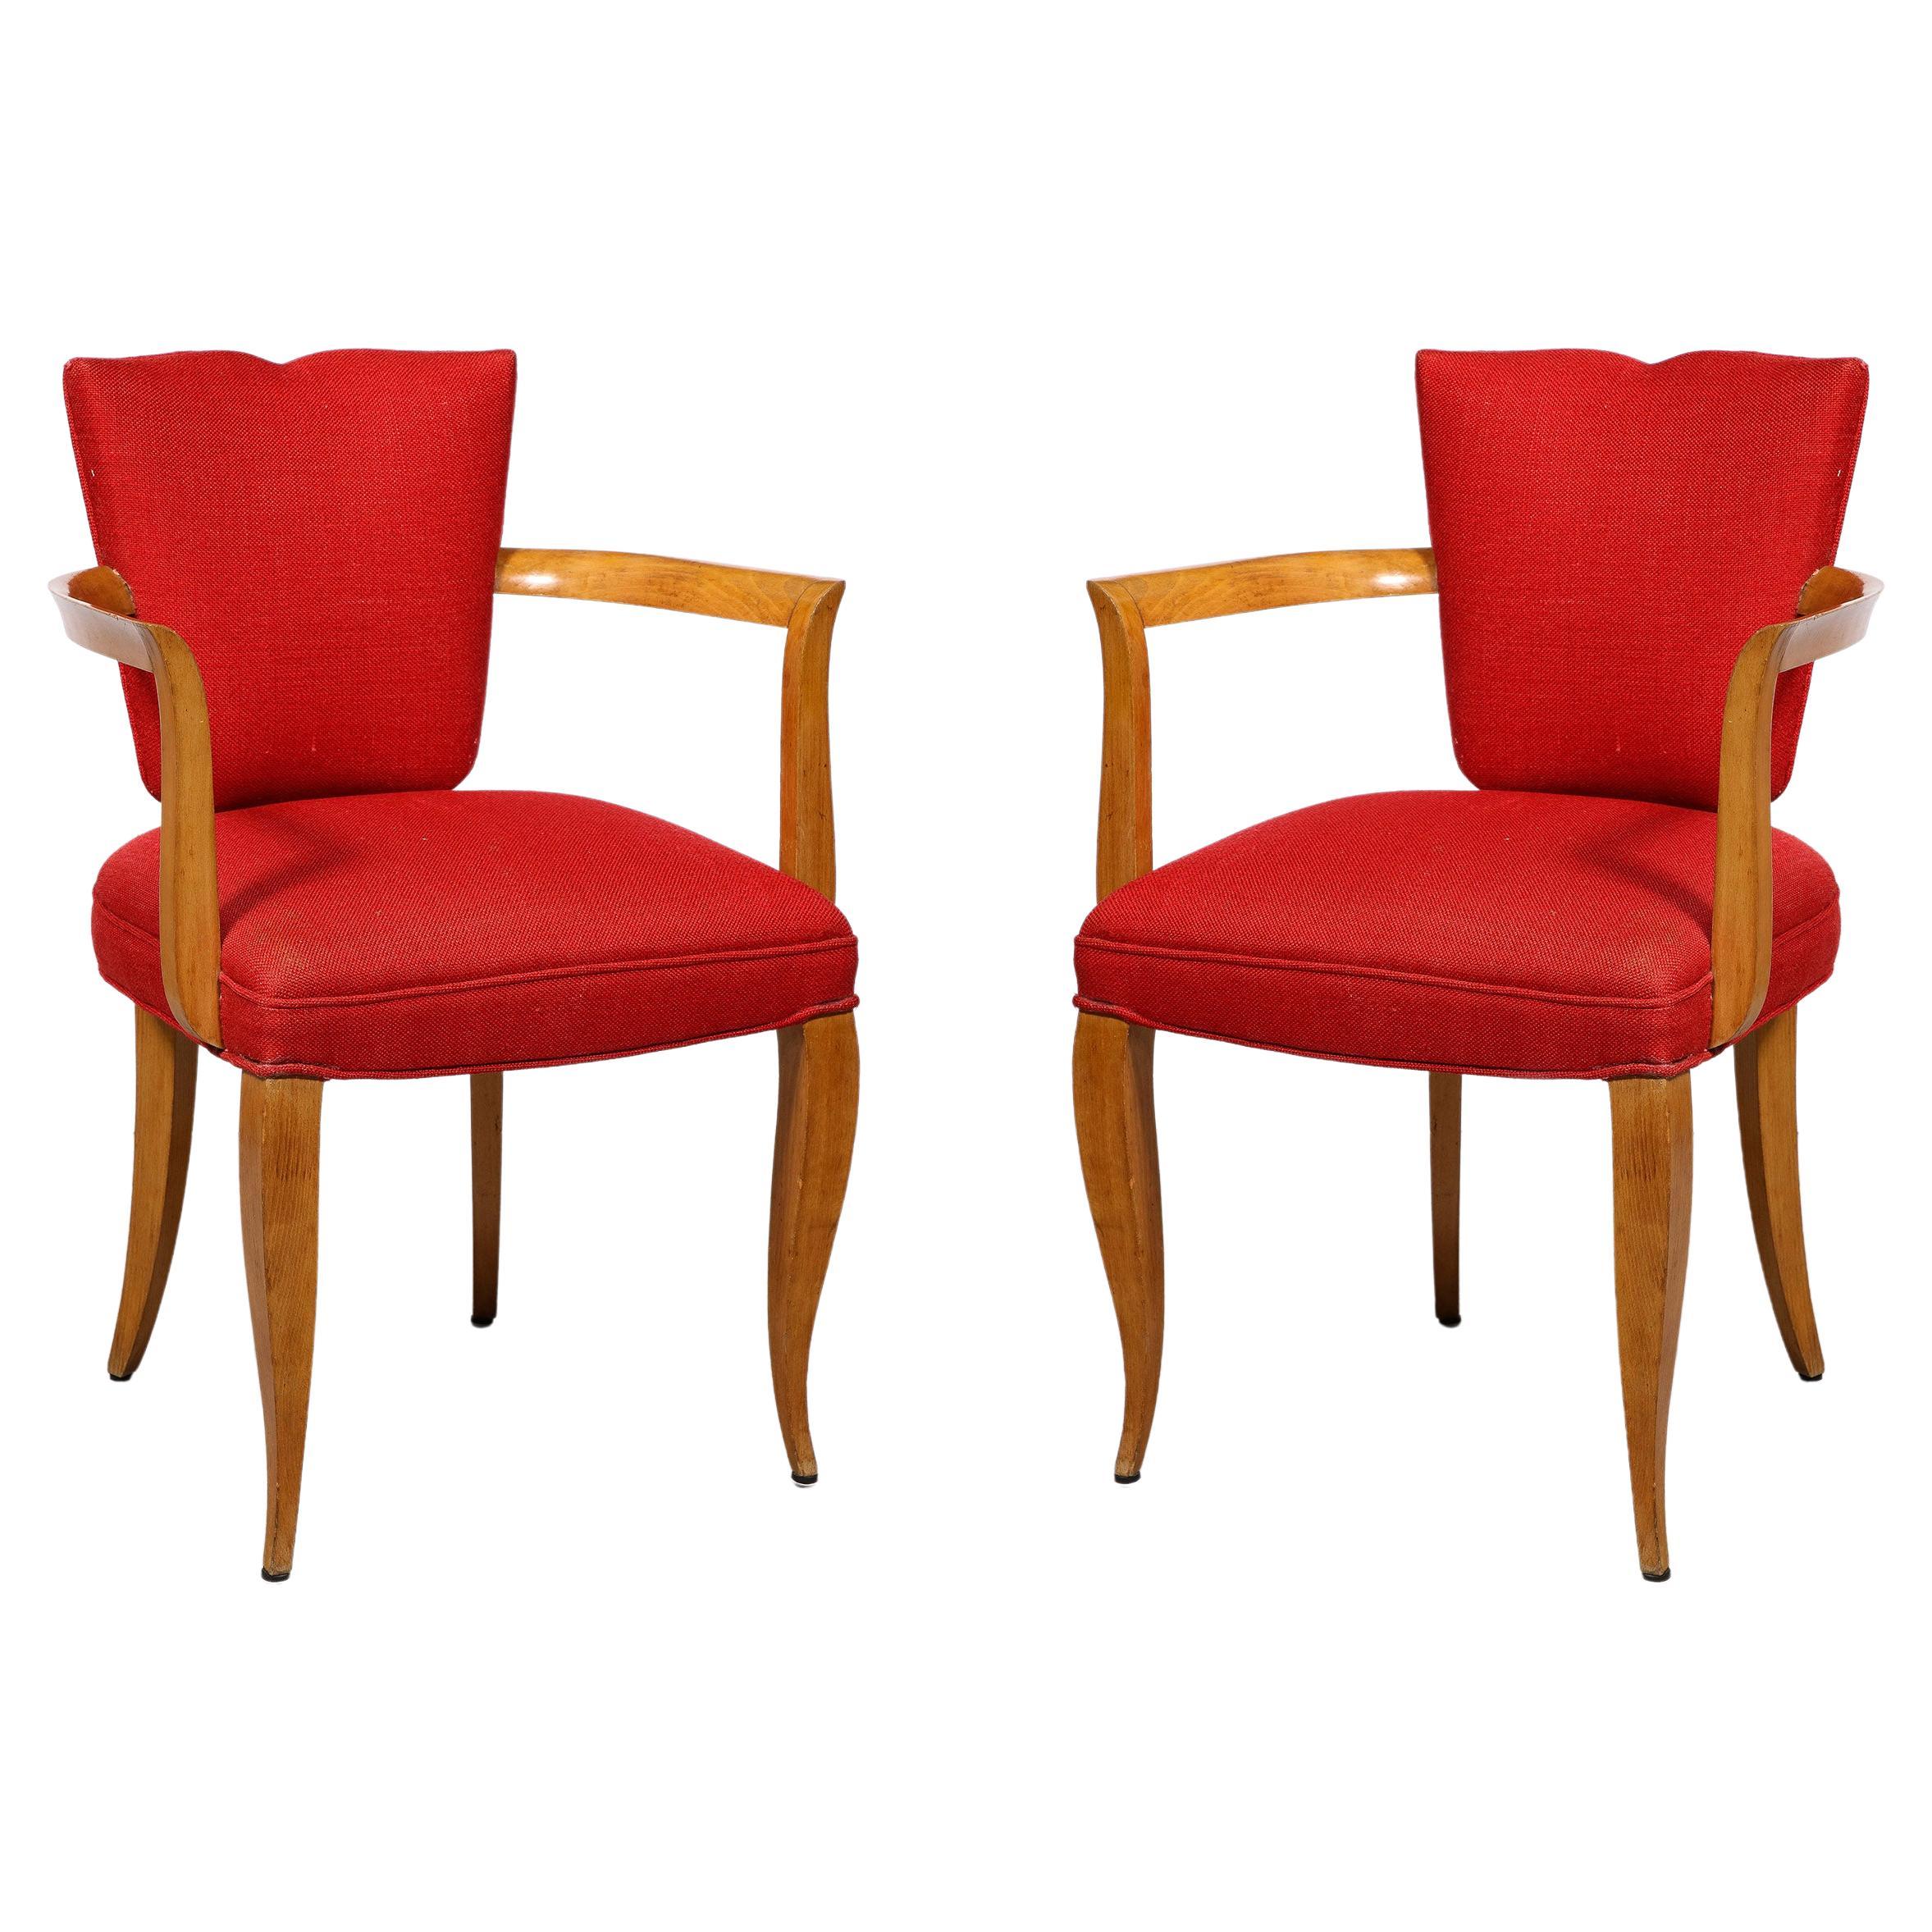 Pair of French Art Deco Armchairs by Jules Leleu